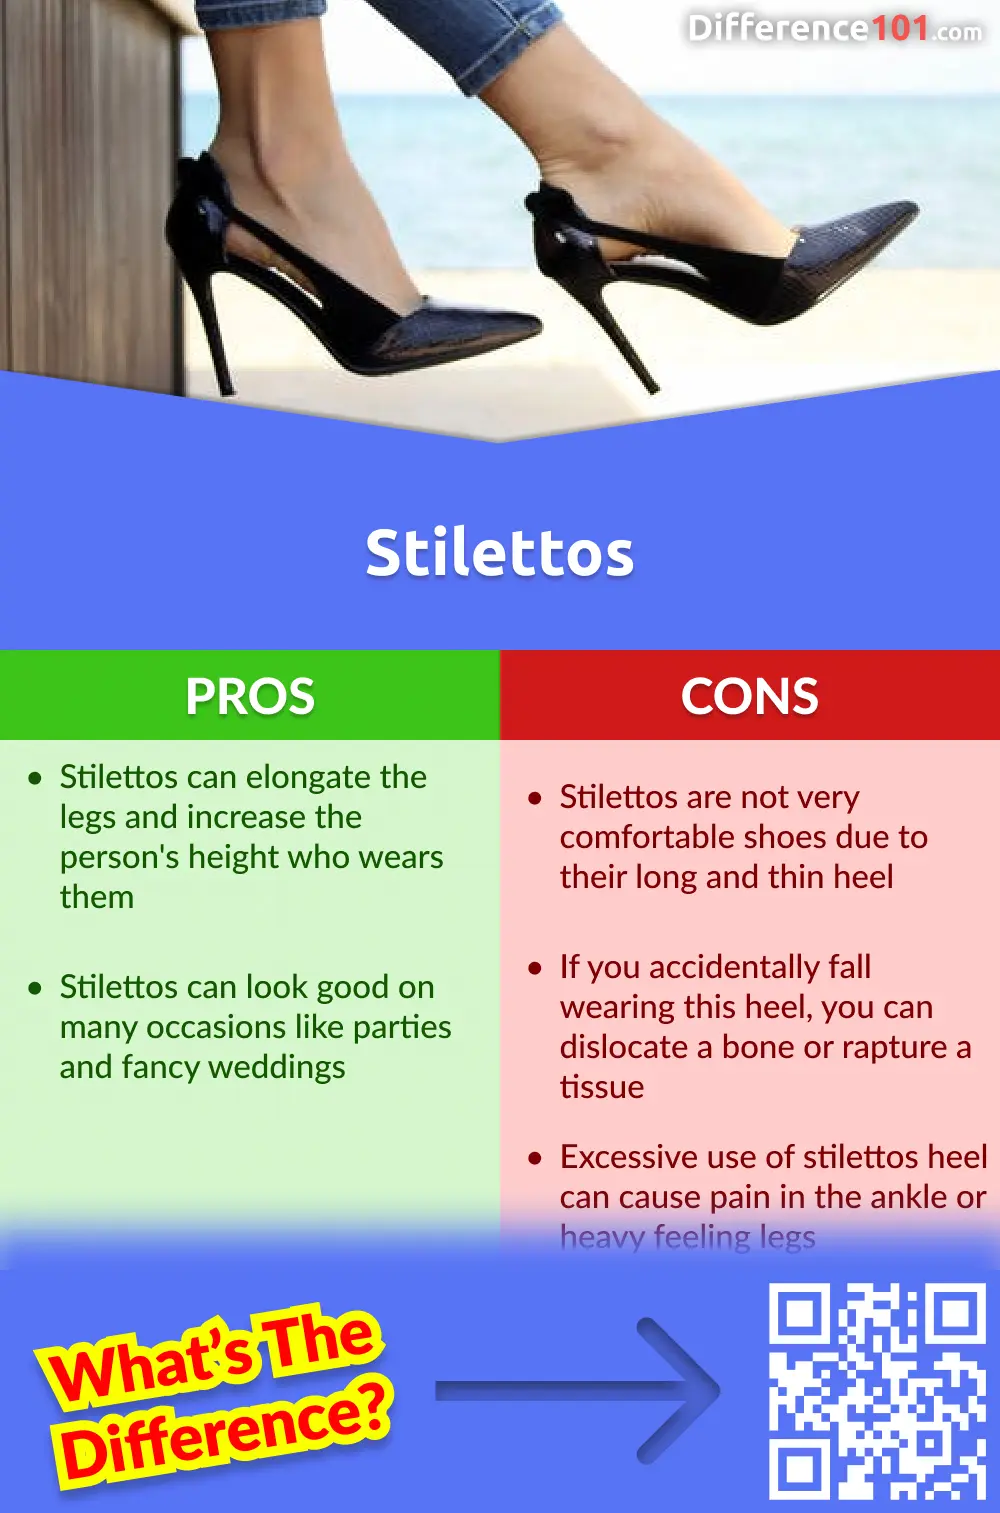 Pumps vs. Stilettos: 7 Key Differences, Pros & Cons, FAQs | Difference 101